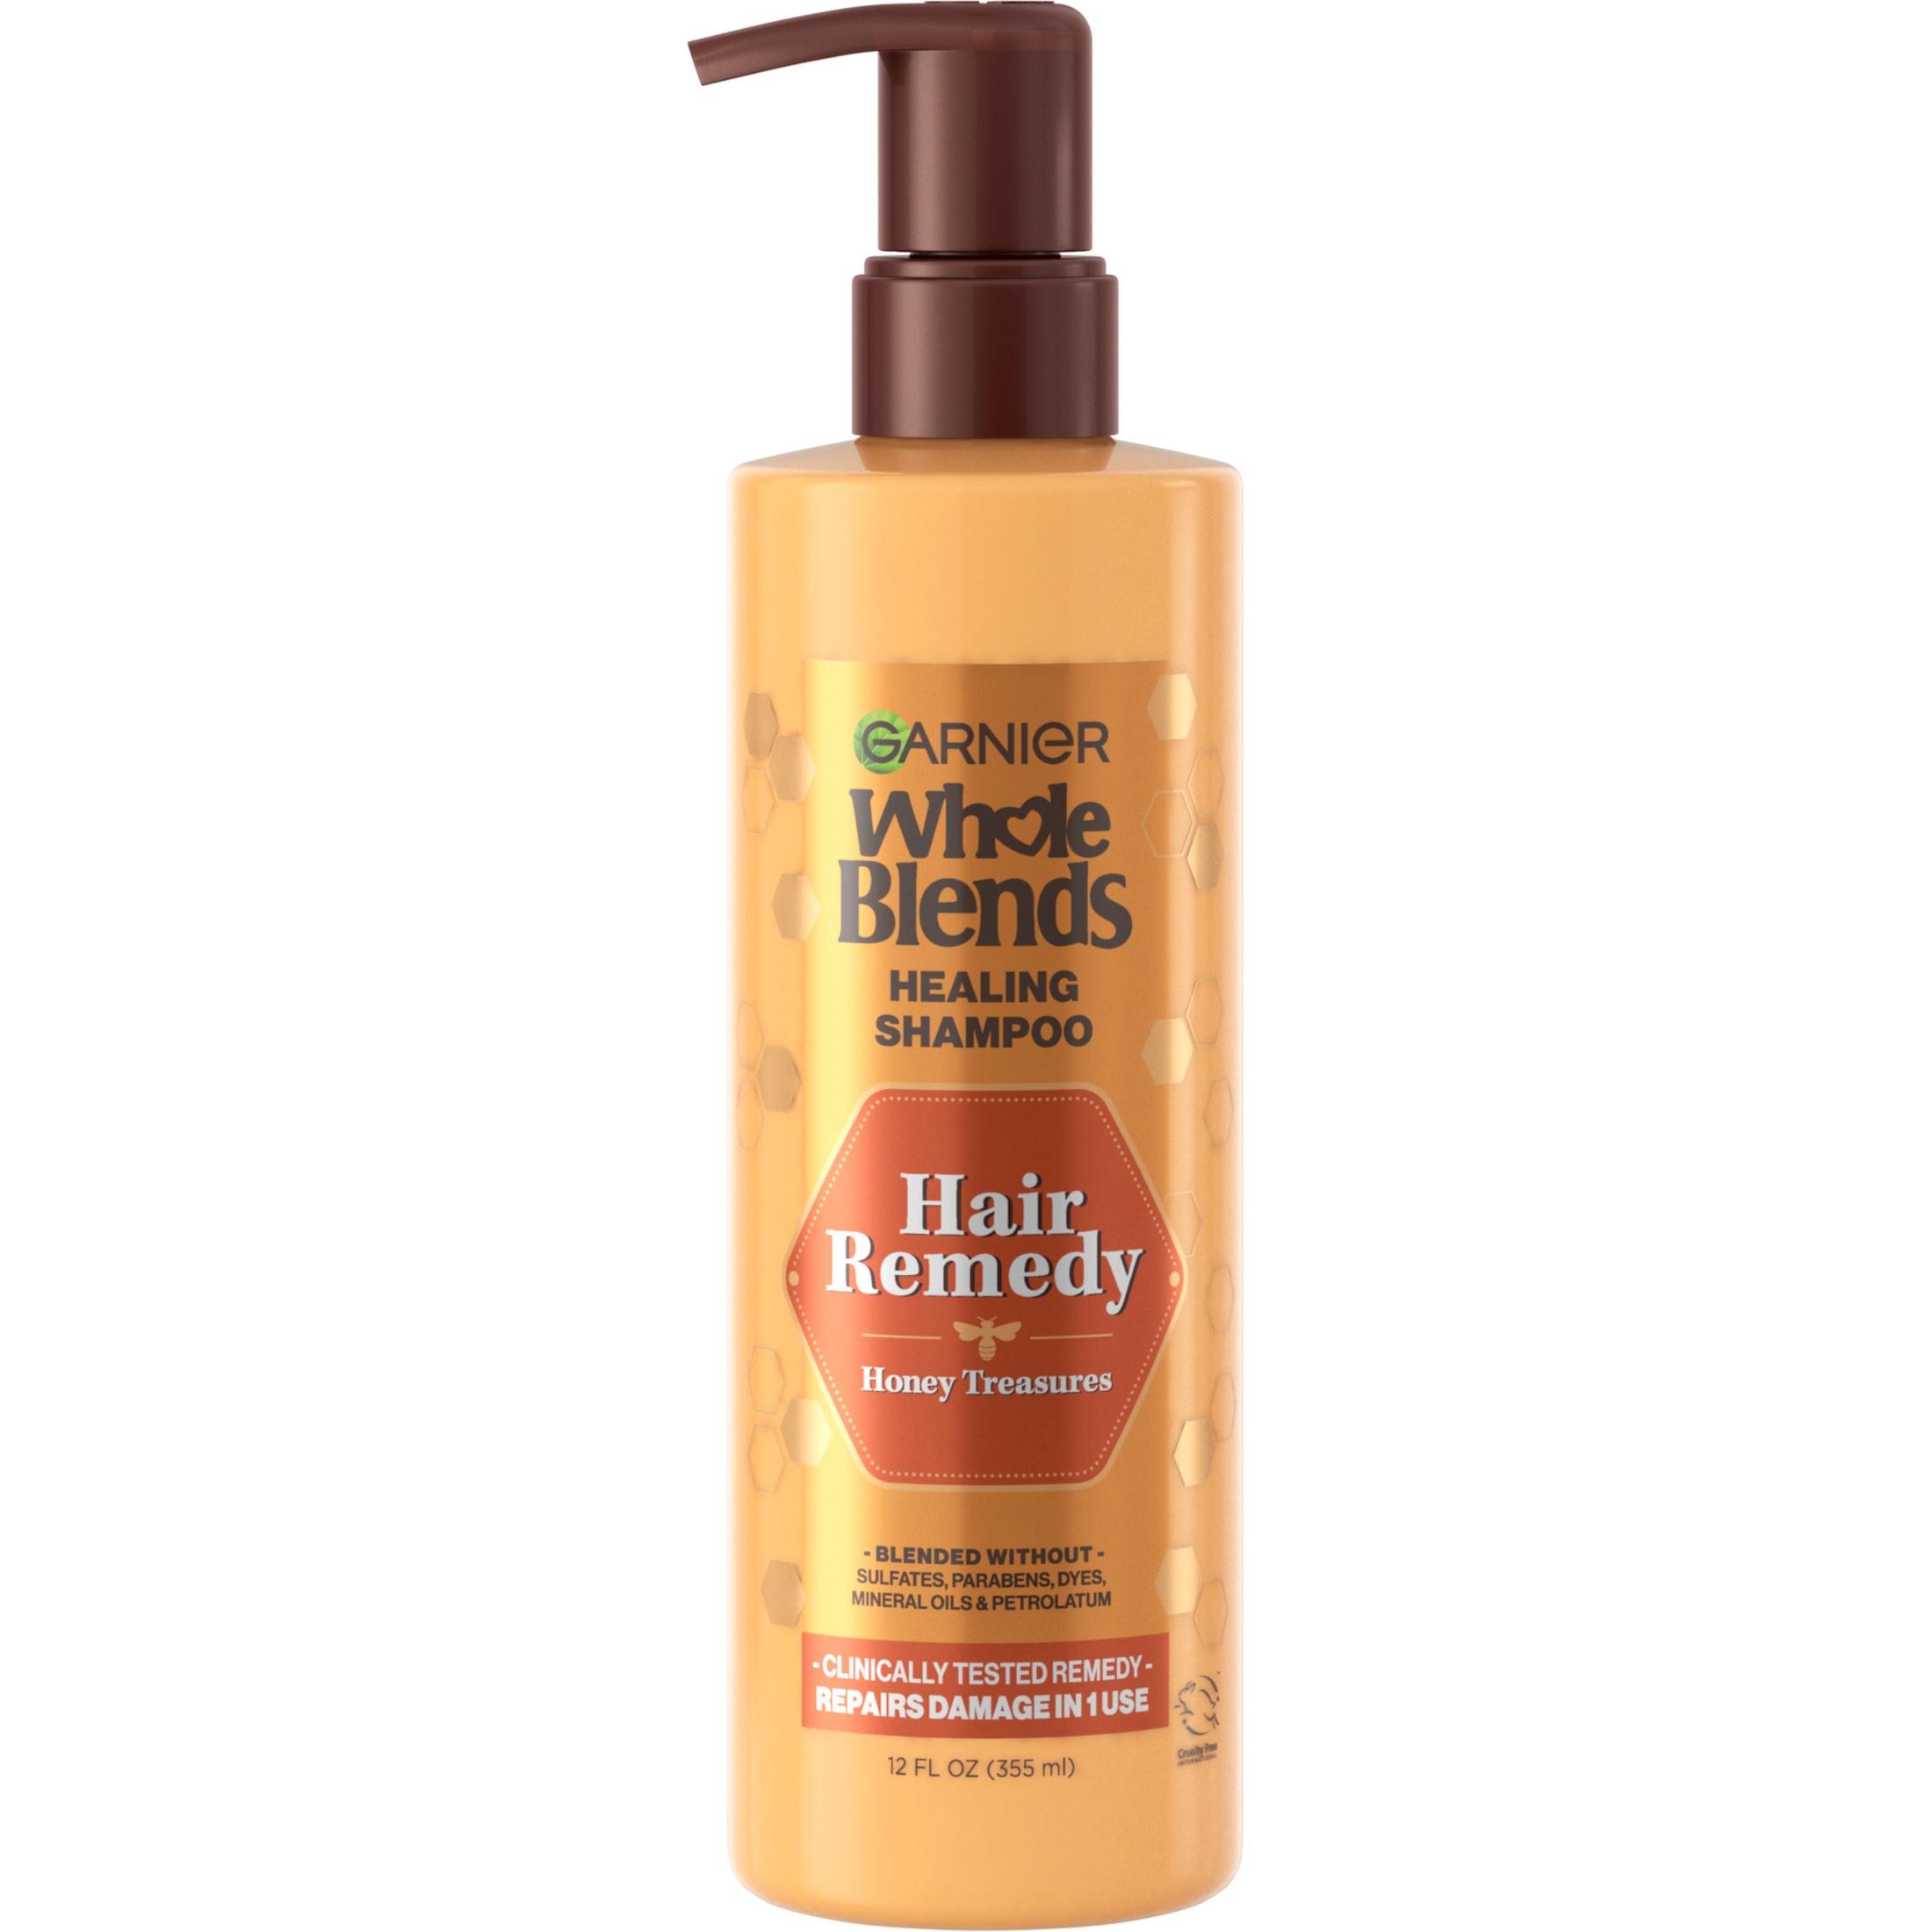 Garnier Whole Blends Sulfate Free Remedy Replenishing Shampoo with Honey for Very Damaged Hair, 12 fl oz - image 1 of 9